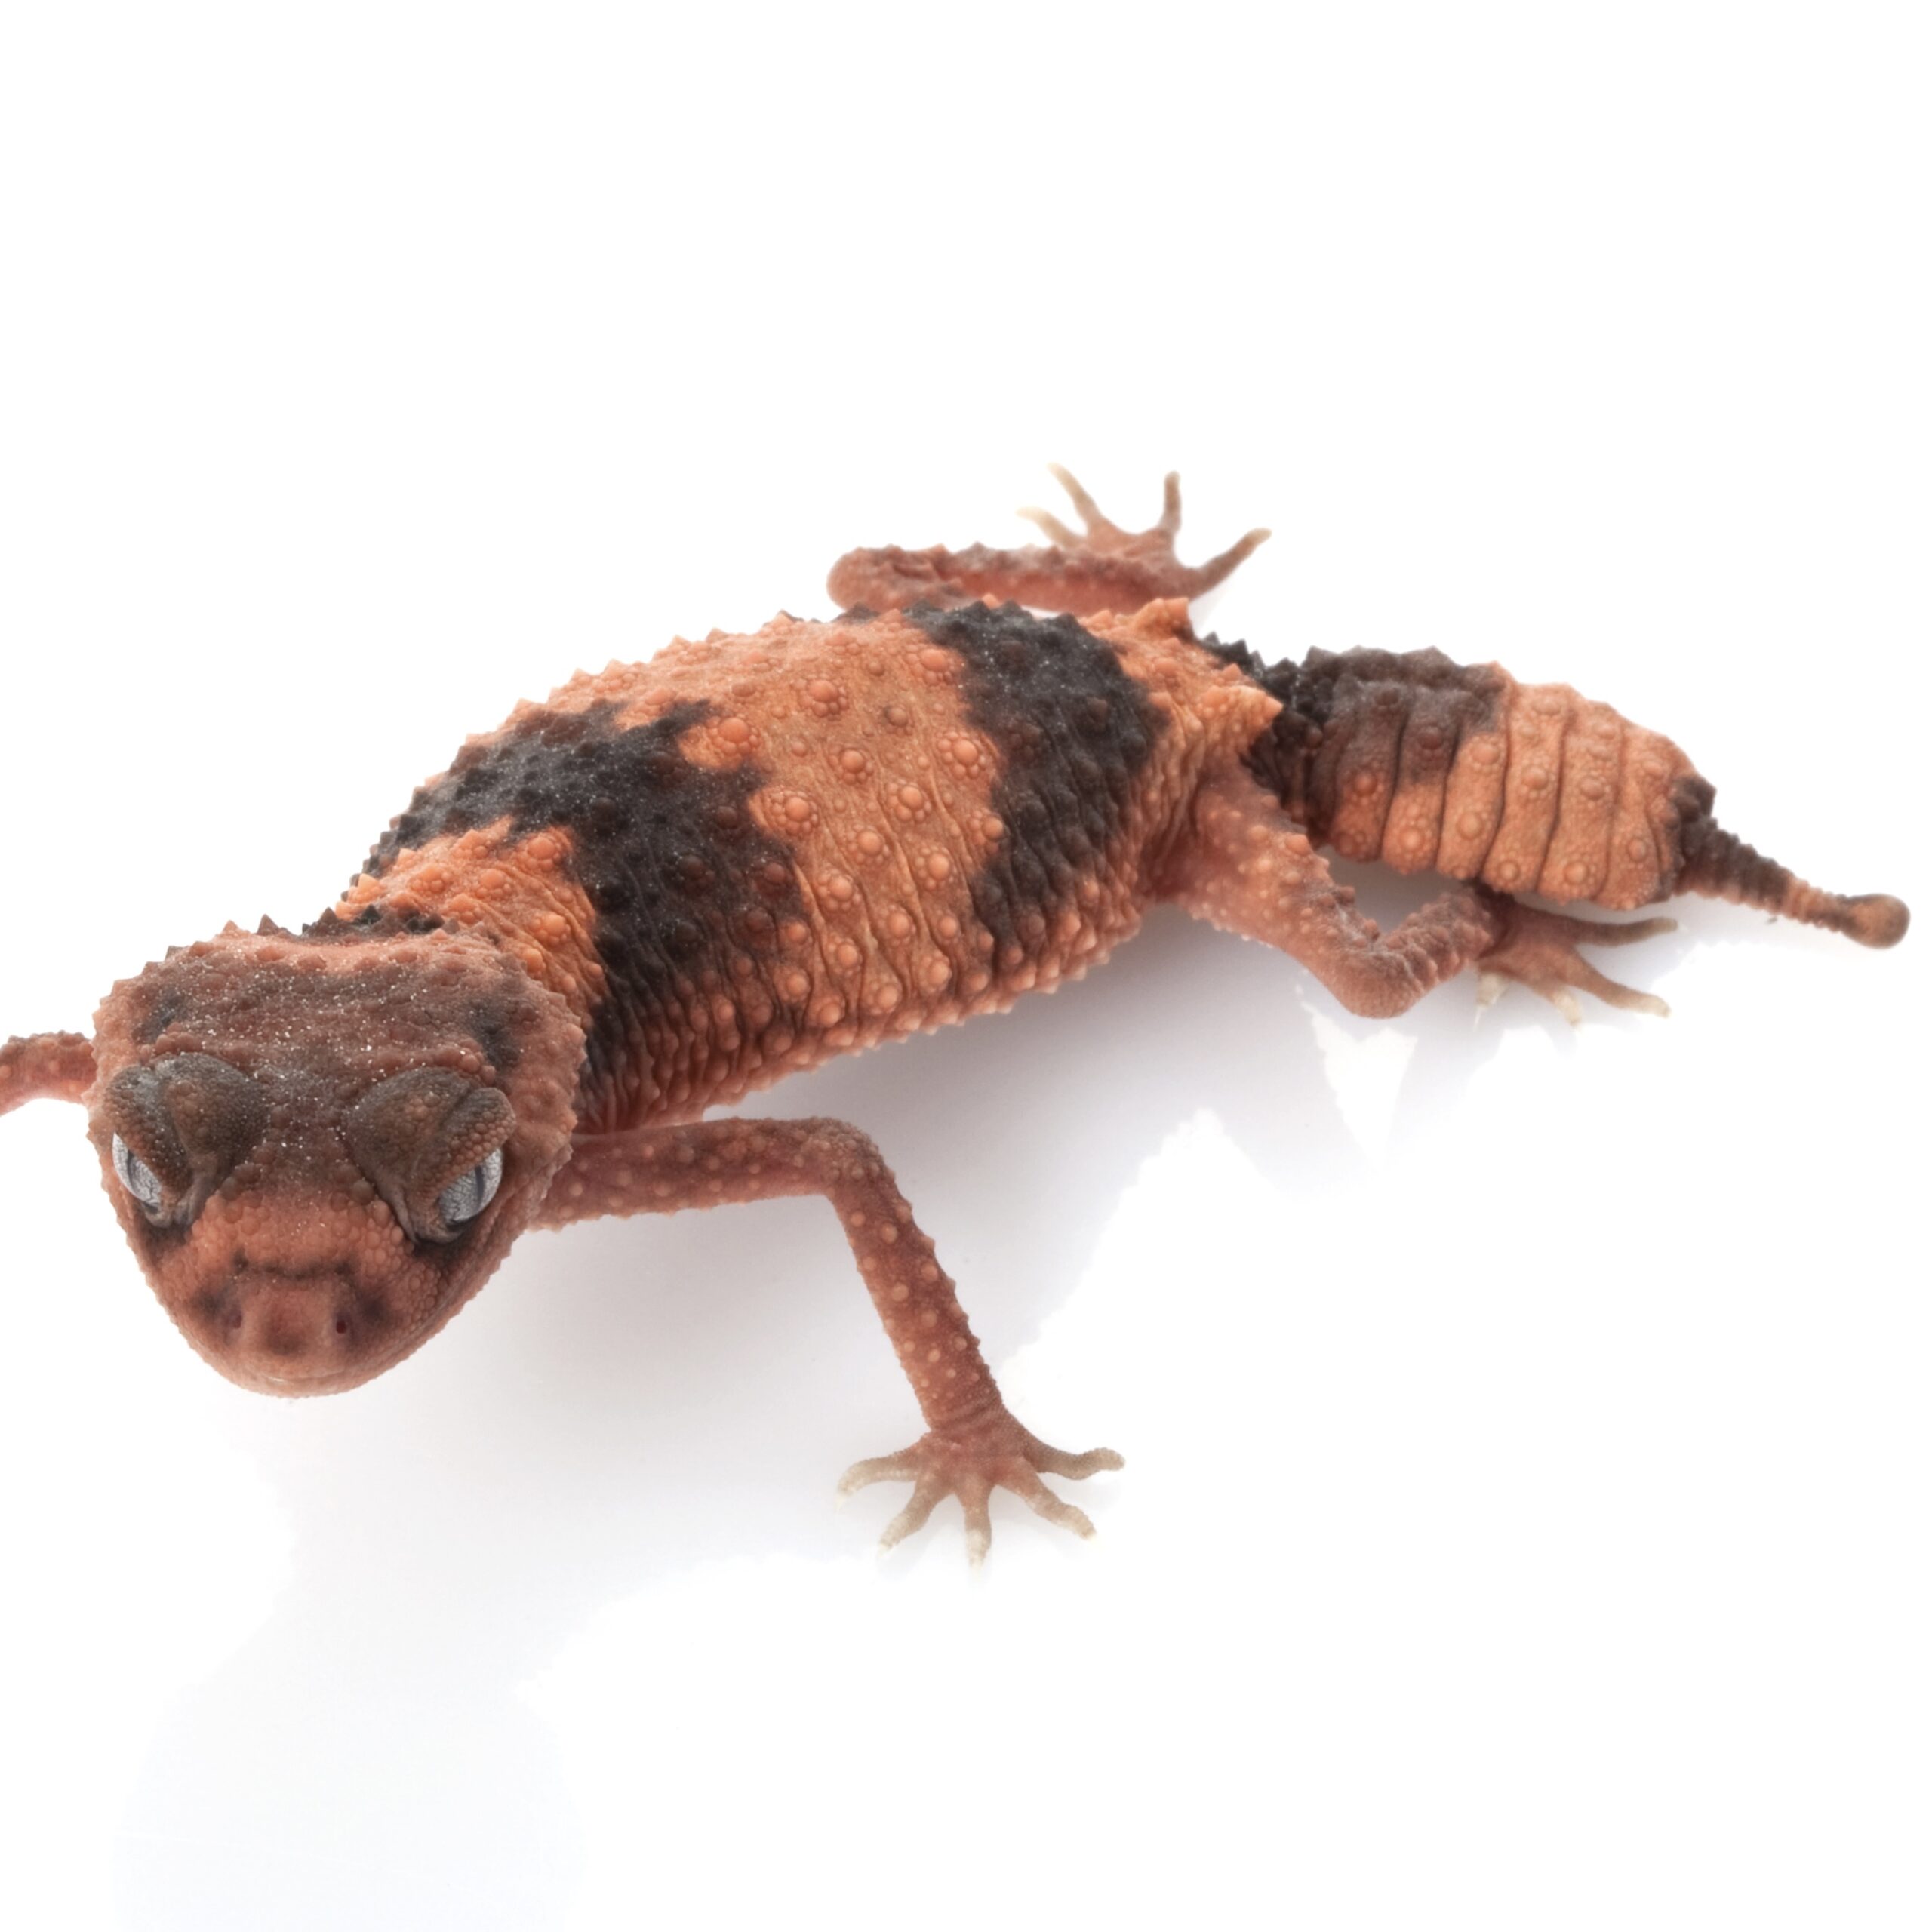 CB Northern Banded Knob-Tailed Gecko